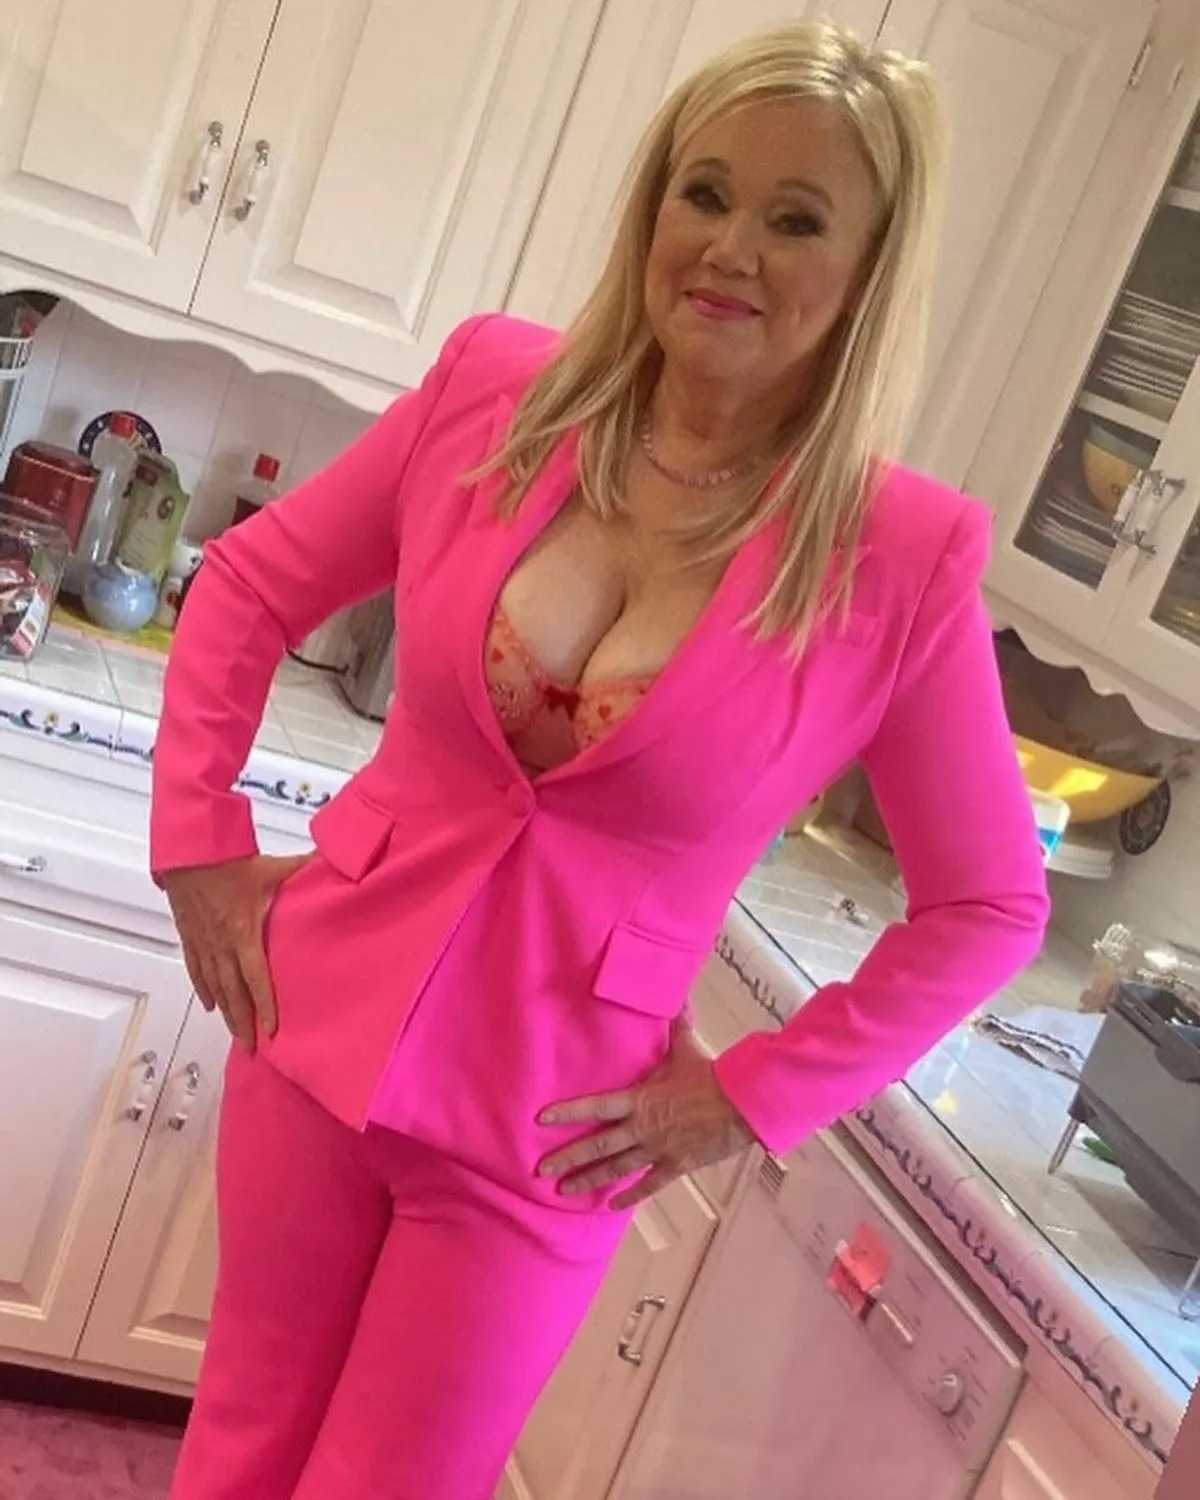 The 90s children’s TV celebrity, 60, strikes a chord with her ageless beauty as she exposes her bra in a revealing outfit